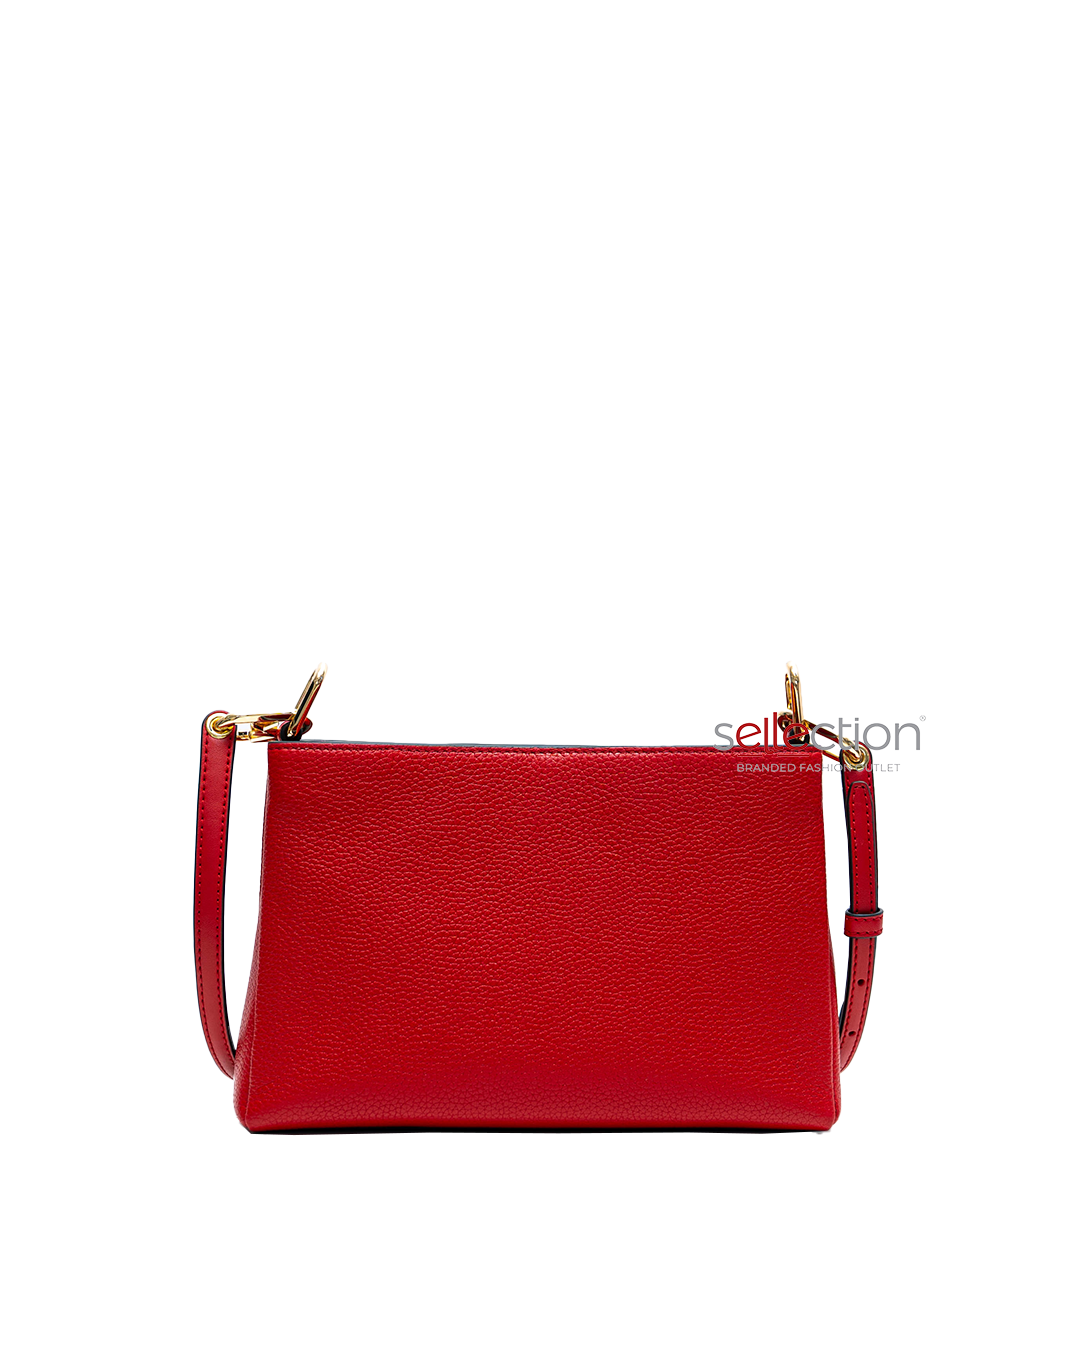 MICHAEL KORS Red Leather Coin Purse - Walmart.com